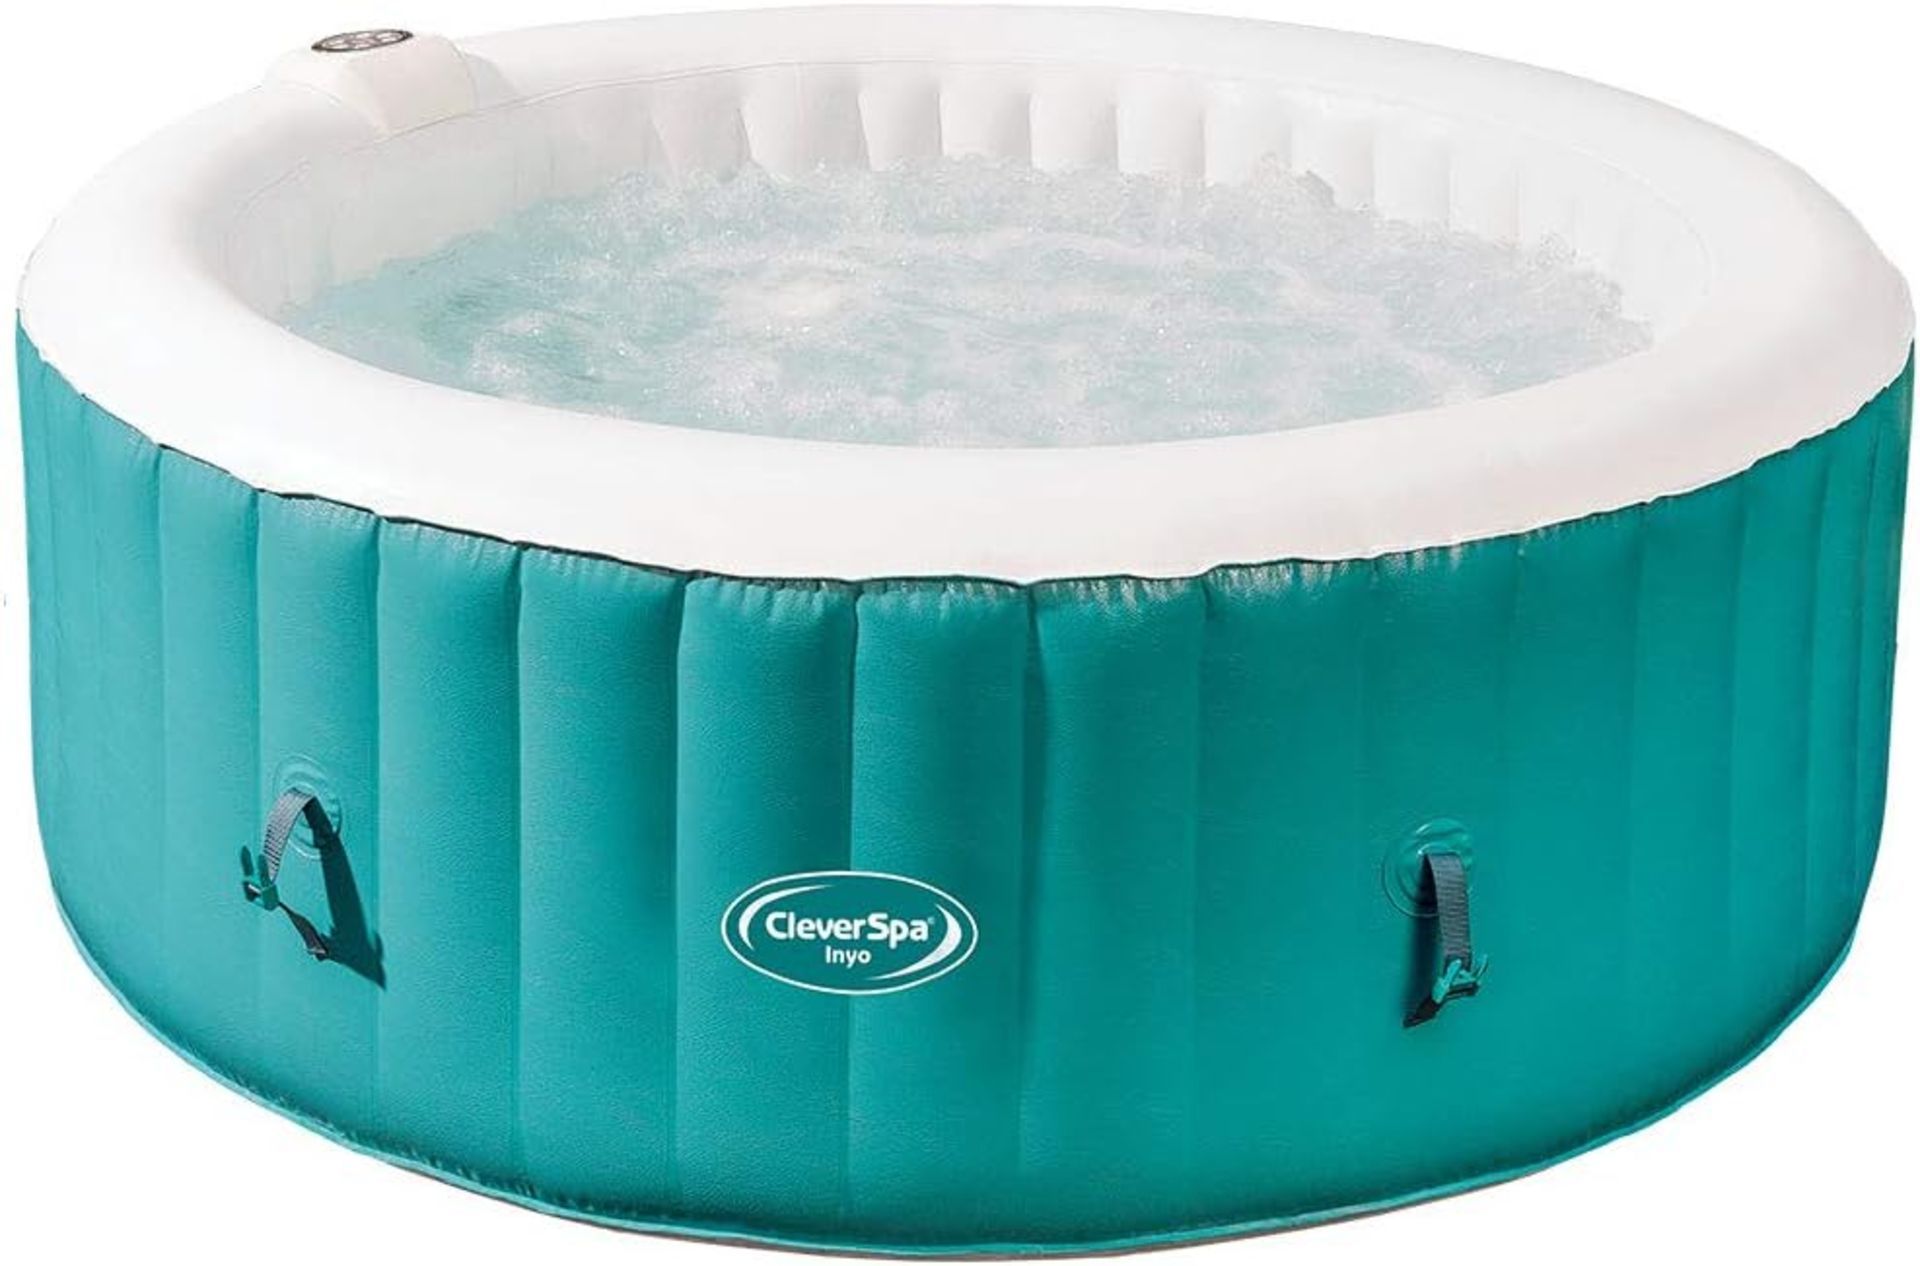 New & Boxed CleverSpa Inyo 4 Person Hot Tub. RRP £499.99. There is no occasion or family get - Image 4 of 5